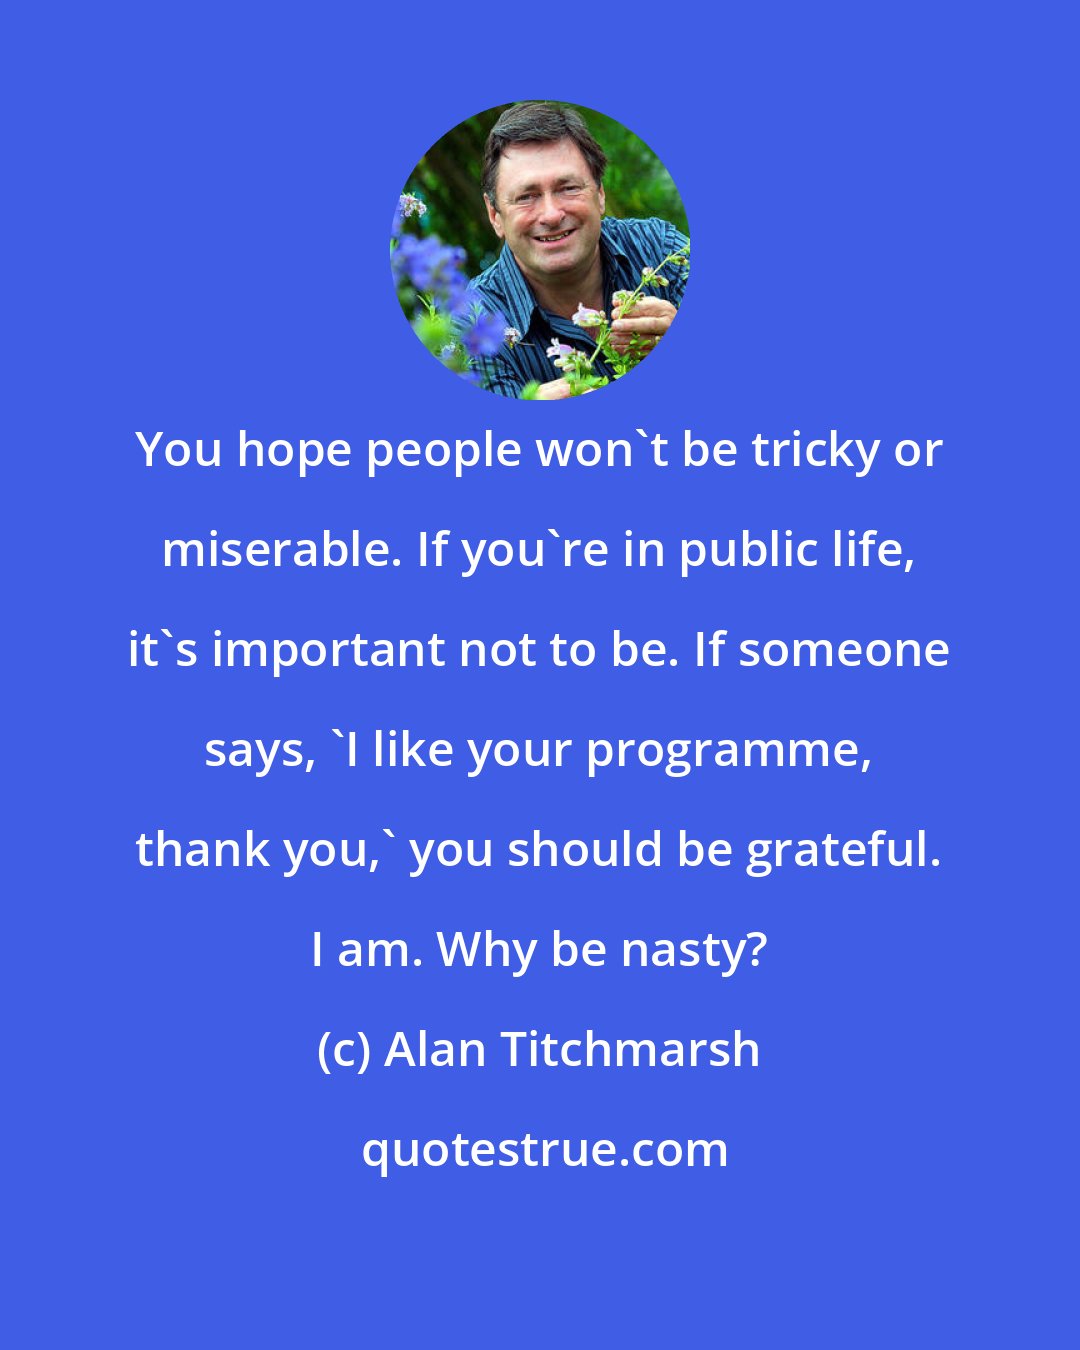 Alan Titchmarsh: You hope people won't be tricky or miserable. If you're in public life, it's important not to be. If someone says, 'I like your programme, thank you,' you should be grateful. I am. Why be nasty?